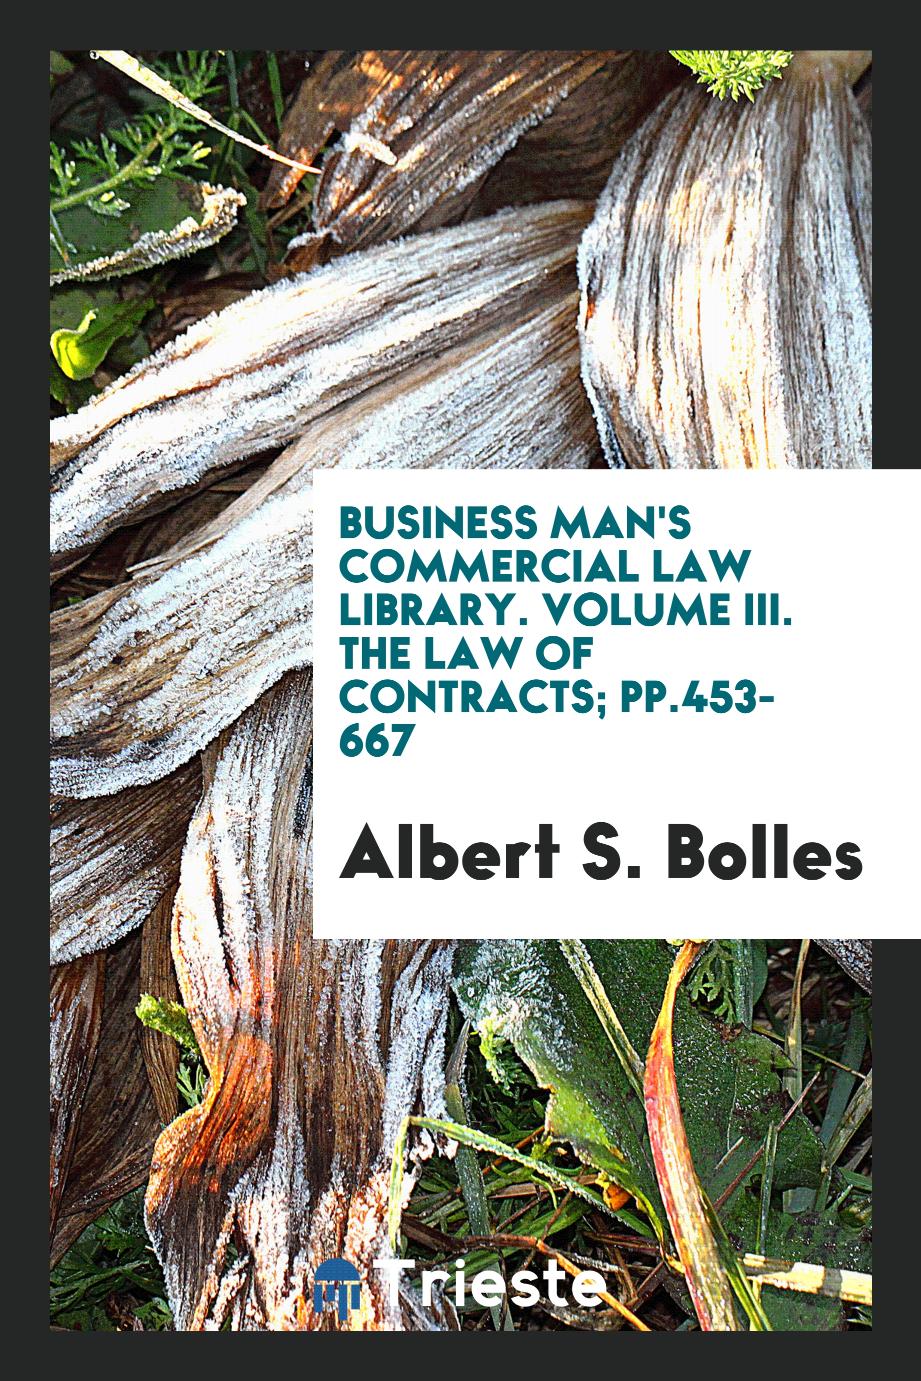 Business Man's Commercial Law Library. Volume III. The Law of Contracts; pp.453-667